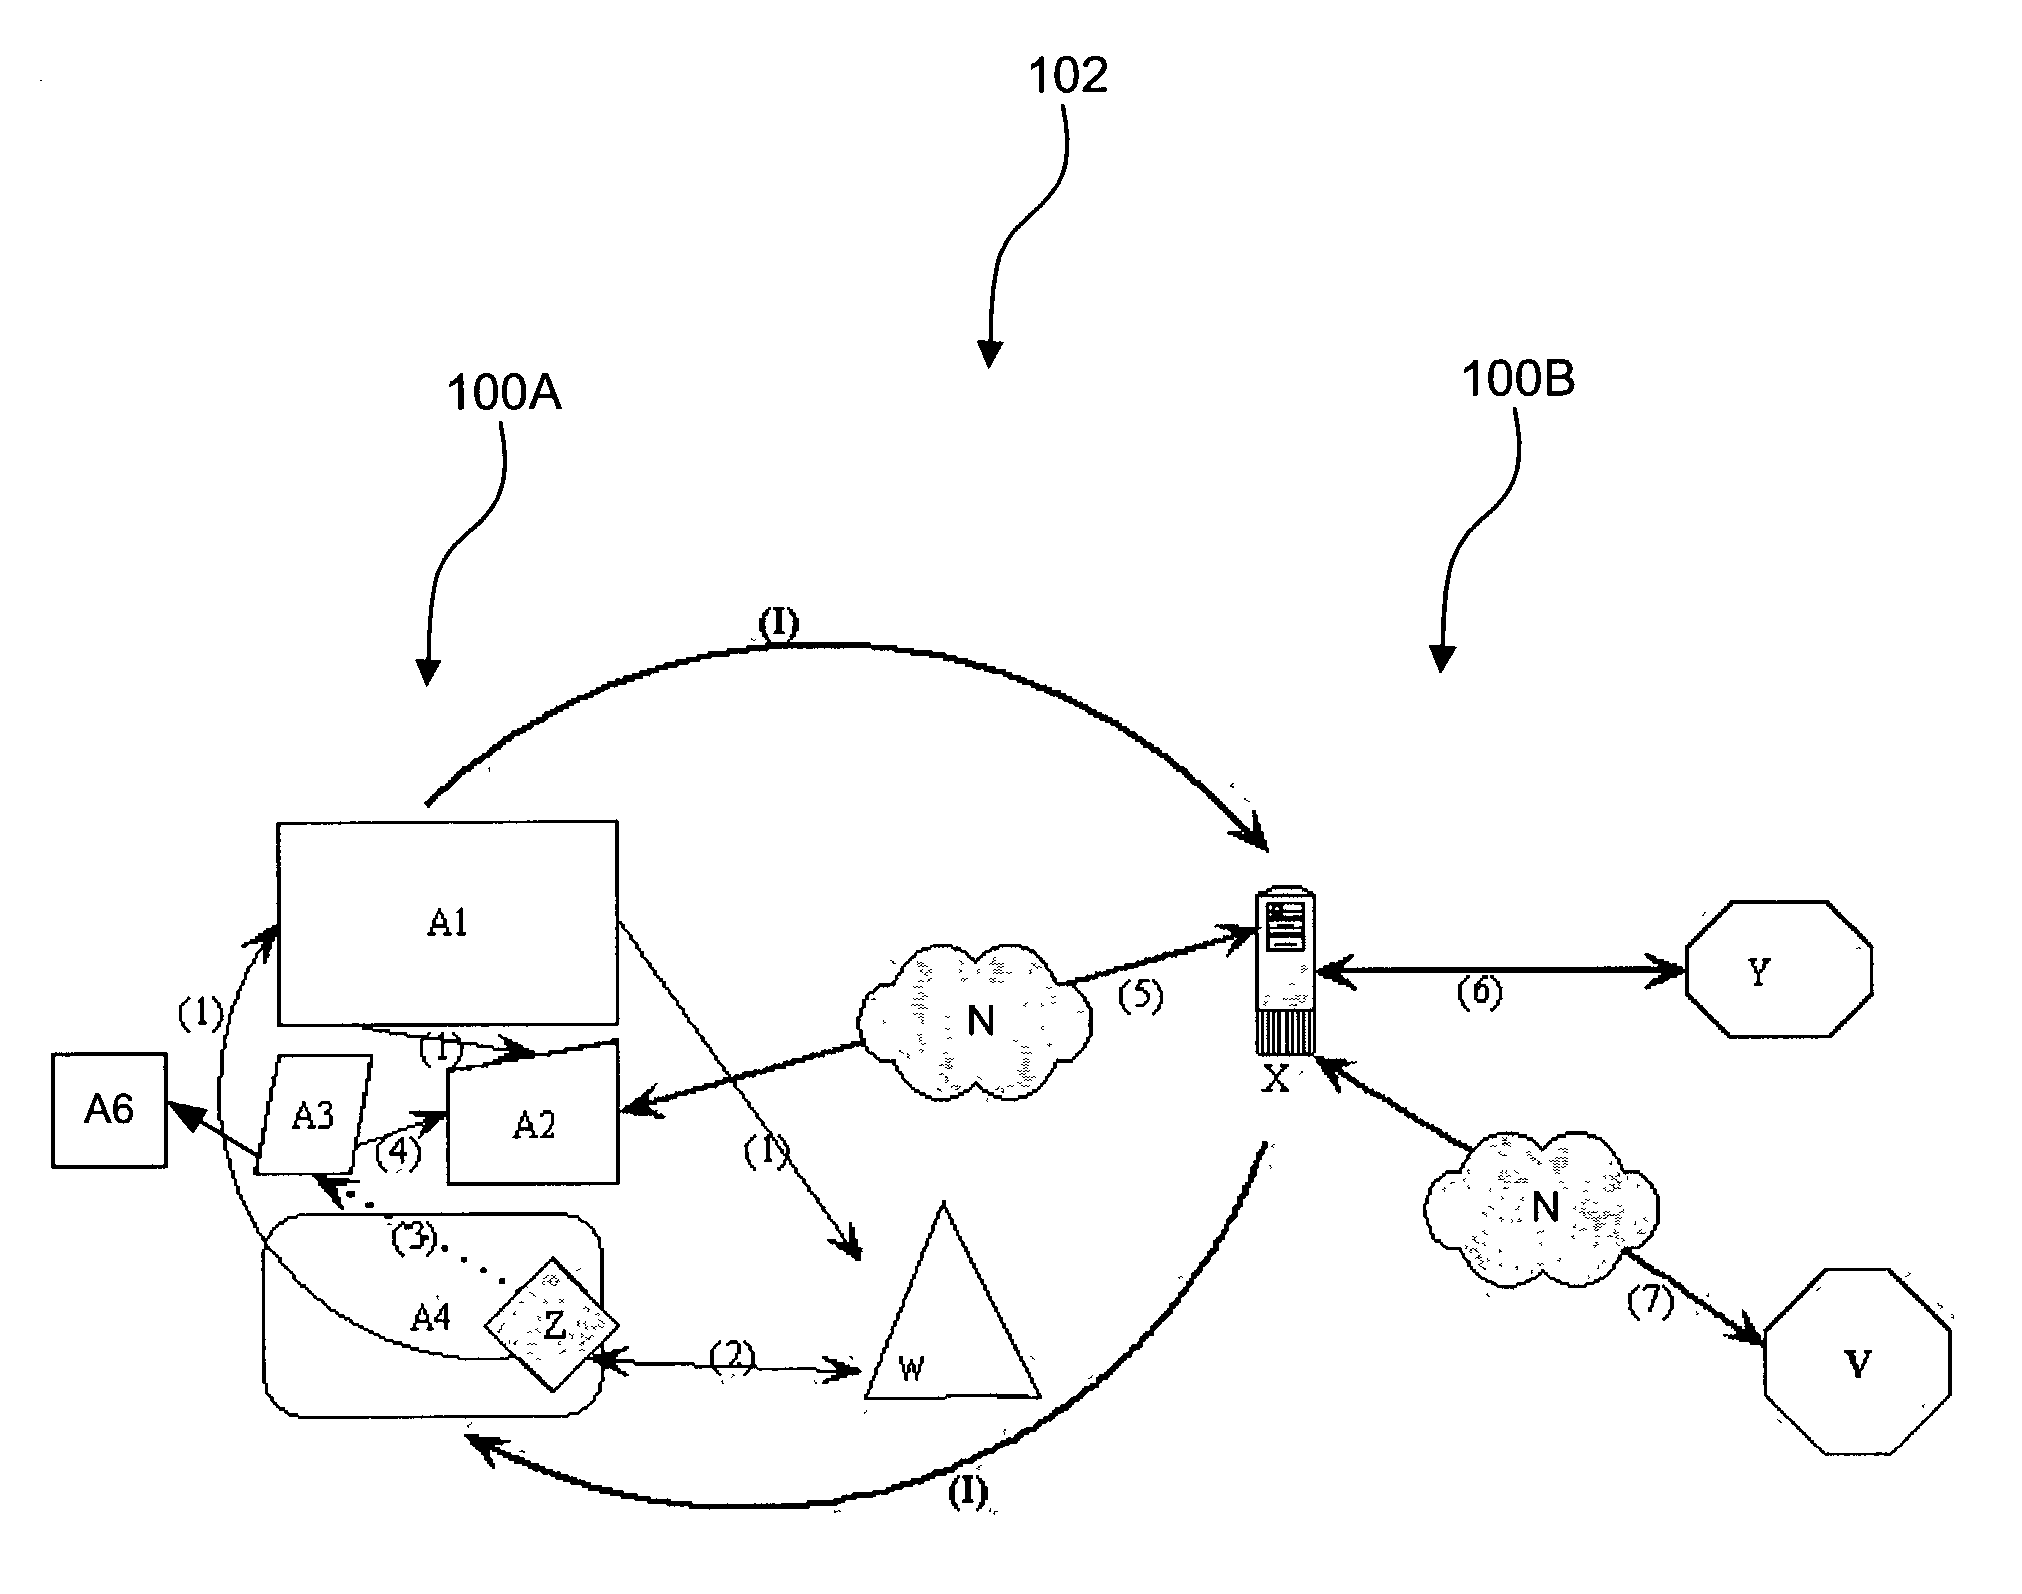 System and method to monitor materials containing smart tags to generate business intelligence